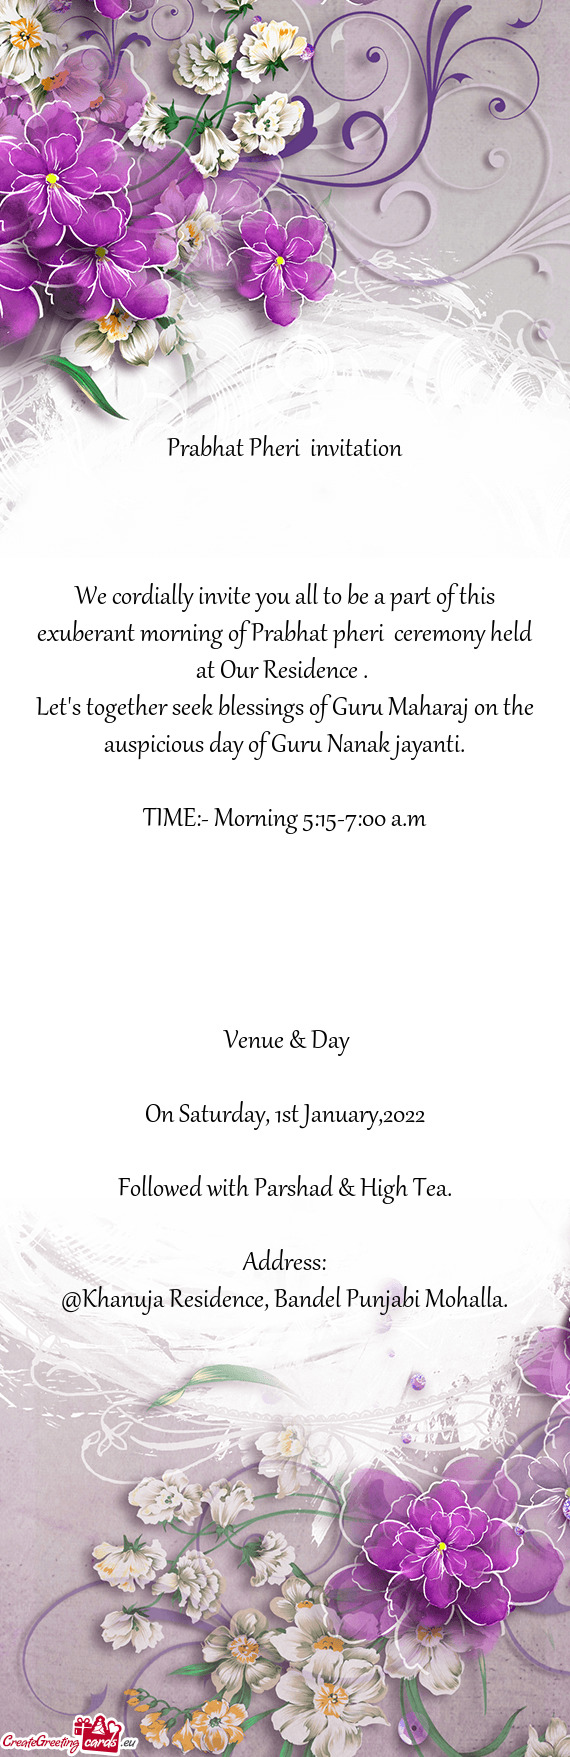 We cordially invite you all to be a part of this exuberant morning of Prabhat pheri ceremony held a